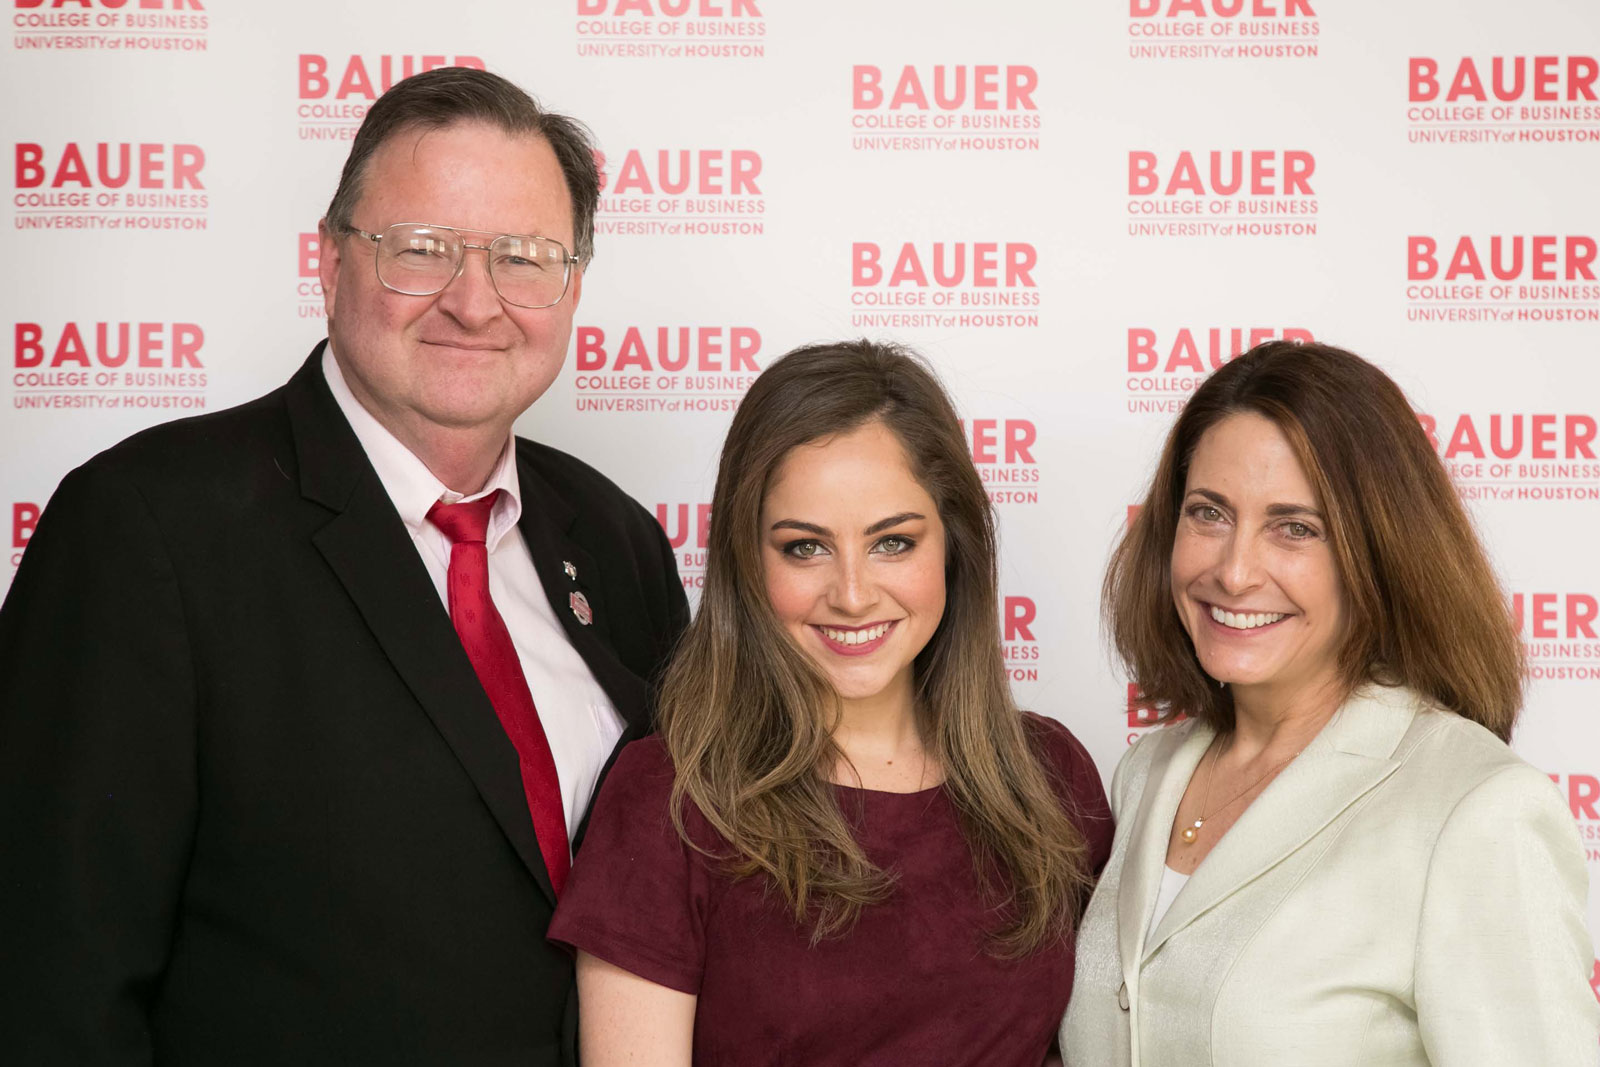 MSACCY Mentor Program at the Bauer College of Business at the University of Houston